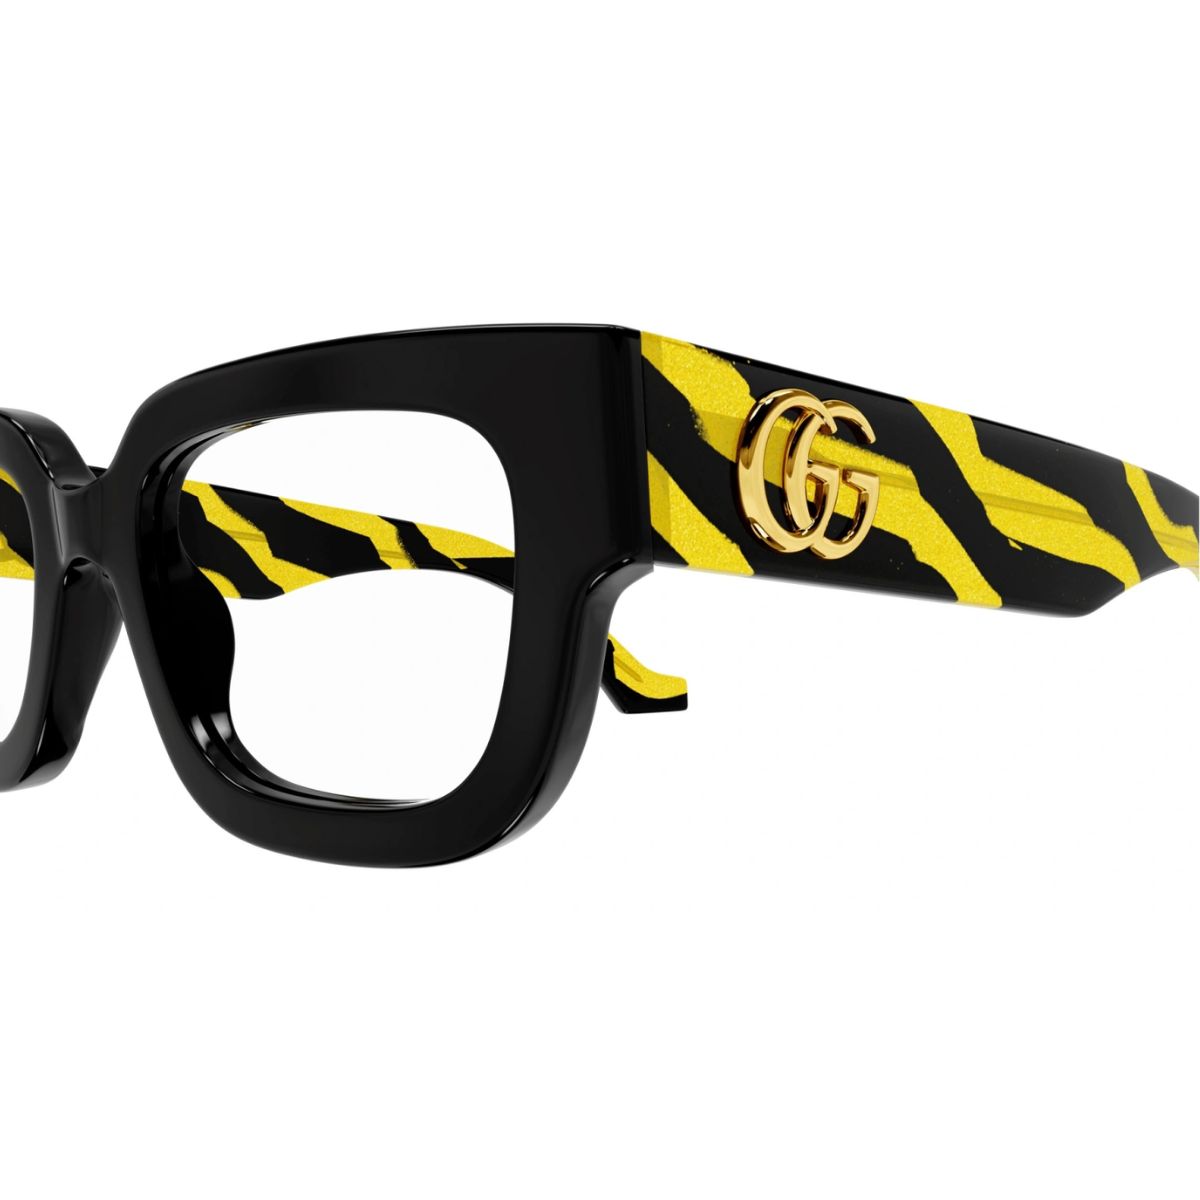 "Gucci 1548O 003 Eyewear - Discover the Latest Trends at Optorium"